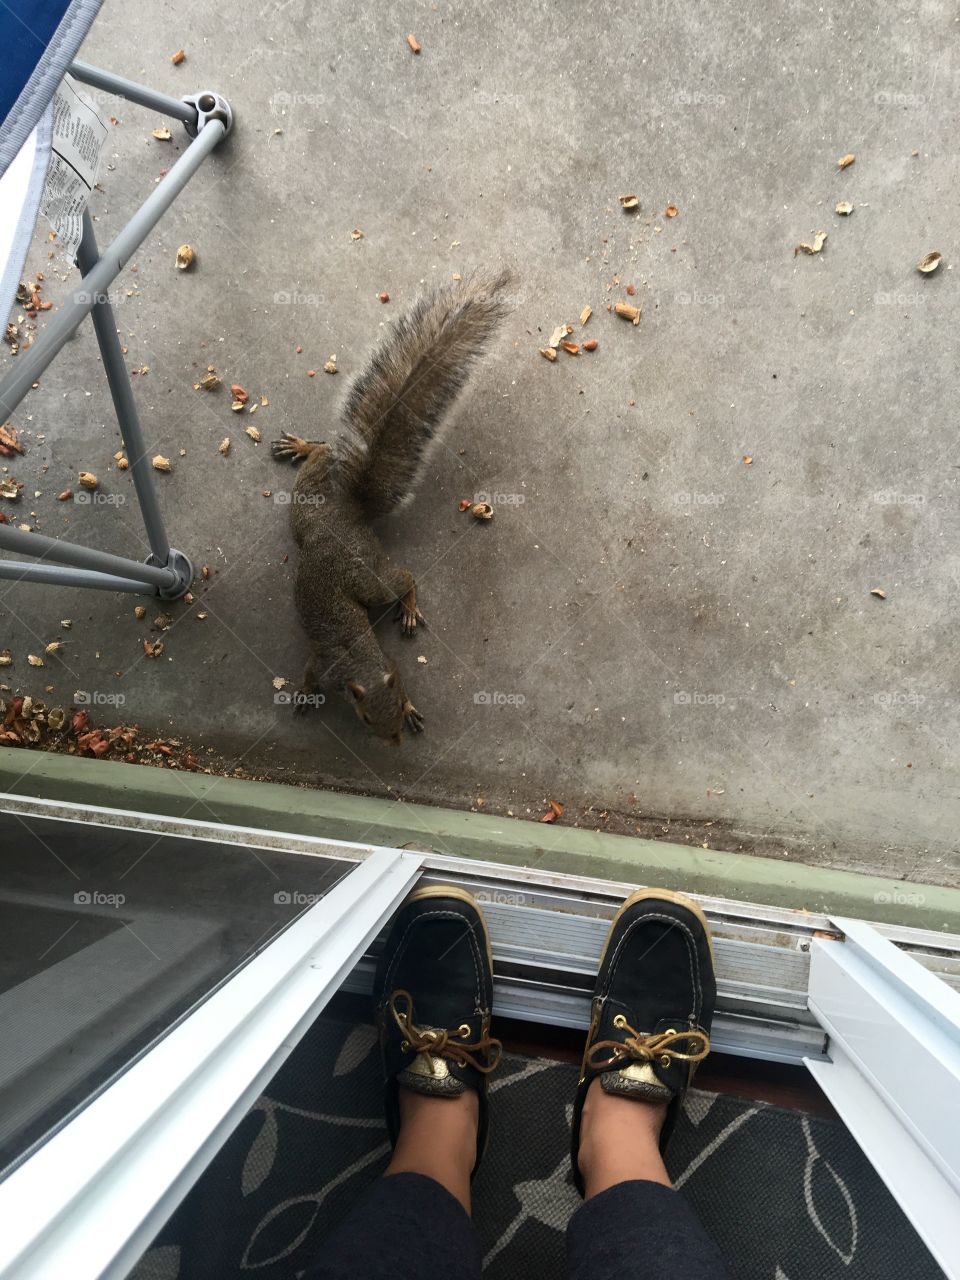 Okay squirrel, getting a little too close